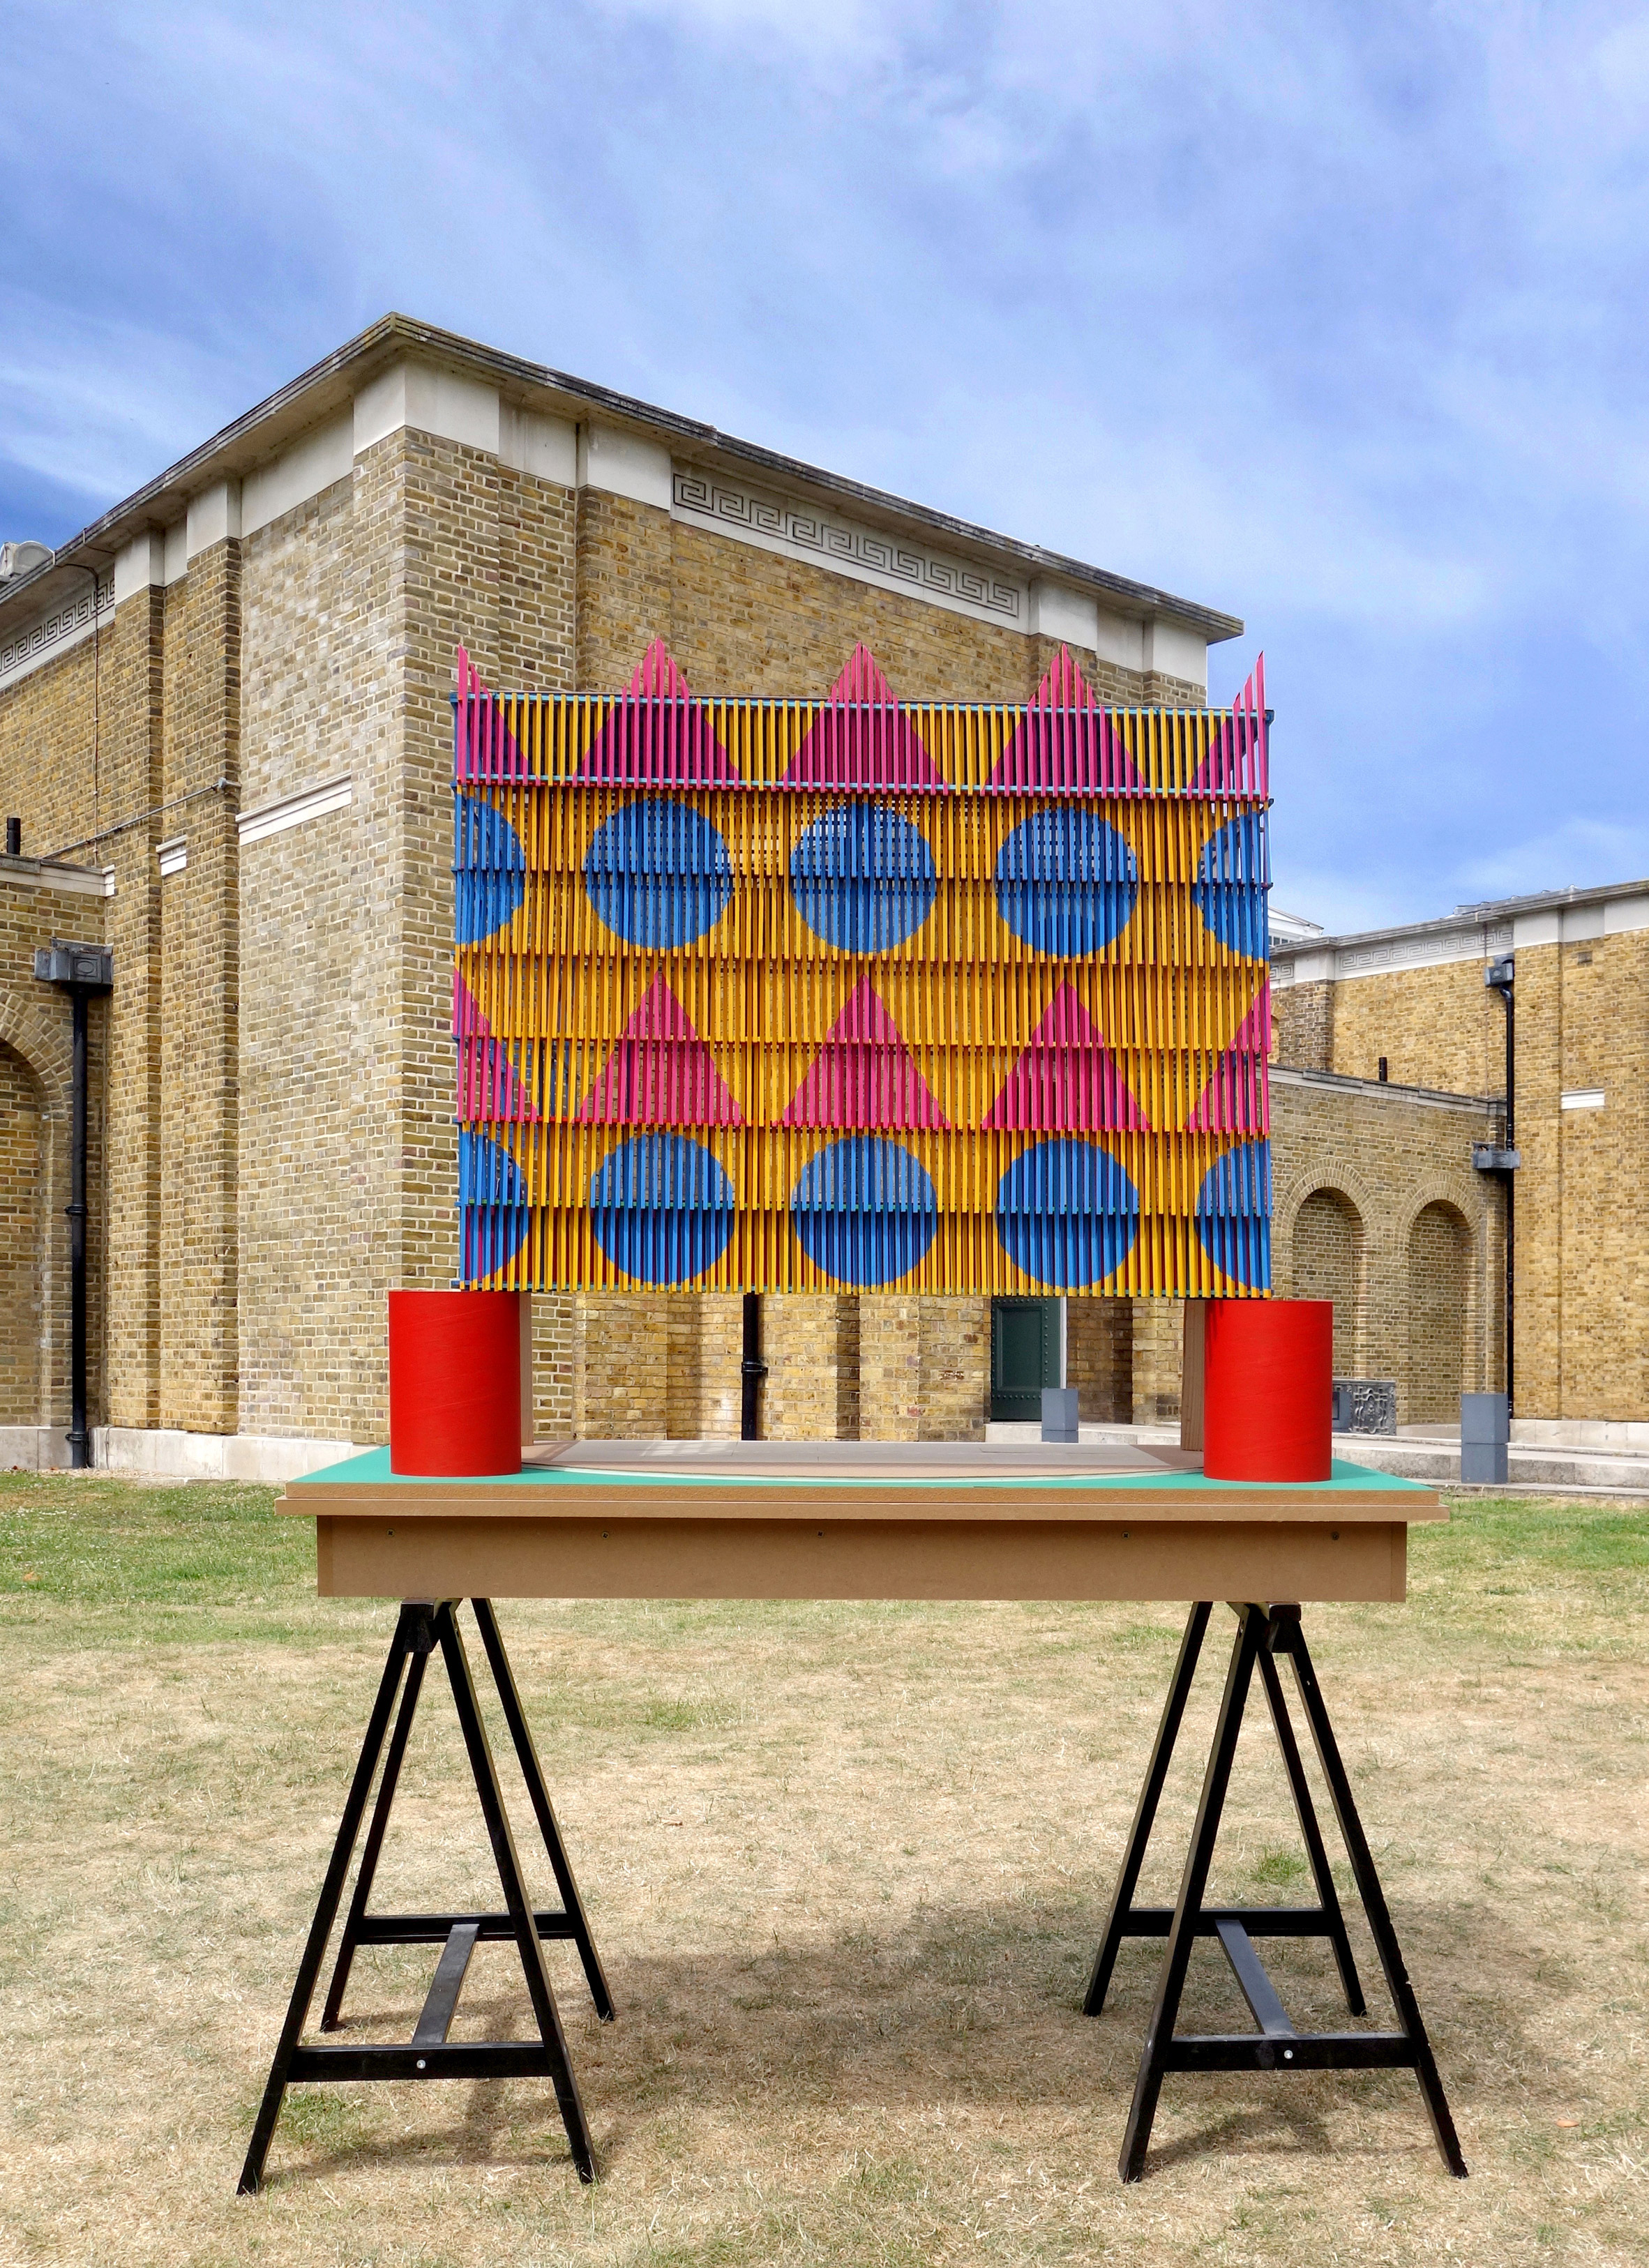 The Colour Palace by Pricegore and Yinka Ilori